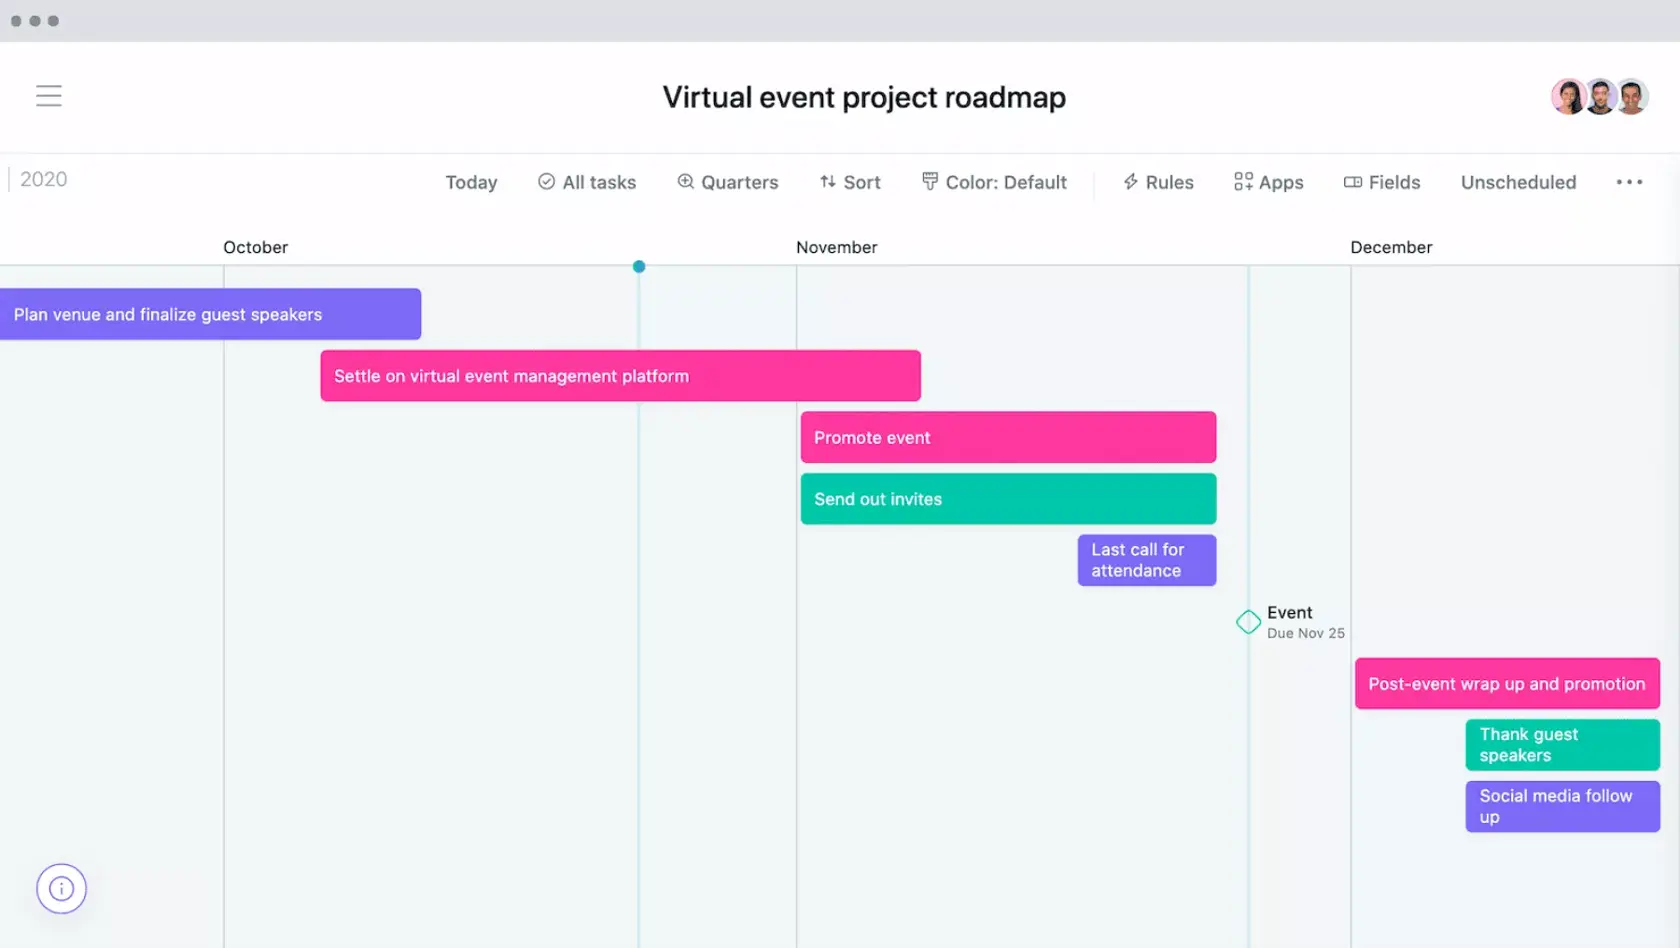 [Old Product UI] Virtual event project roadmap example in Asana Gantt chart (Timeline)